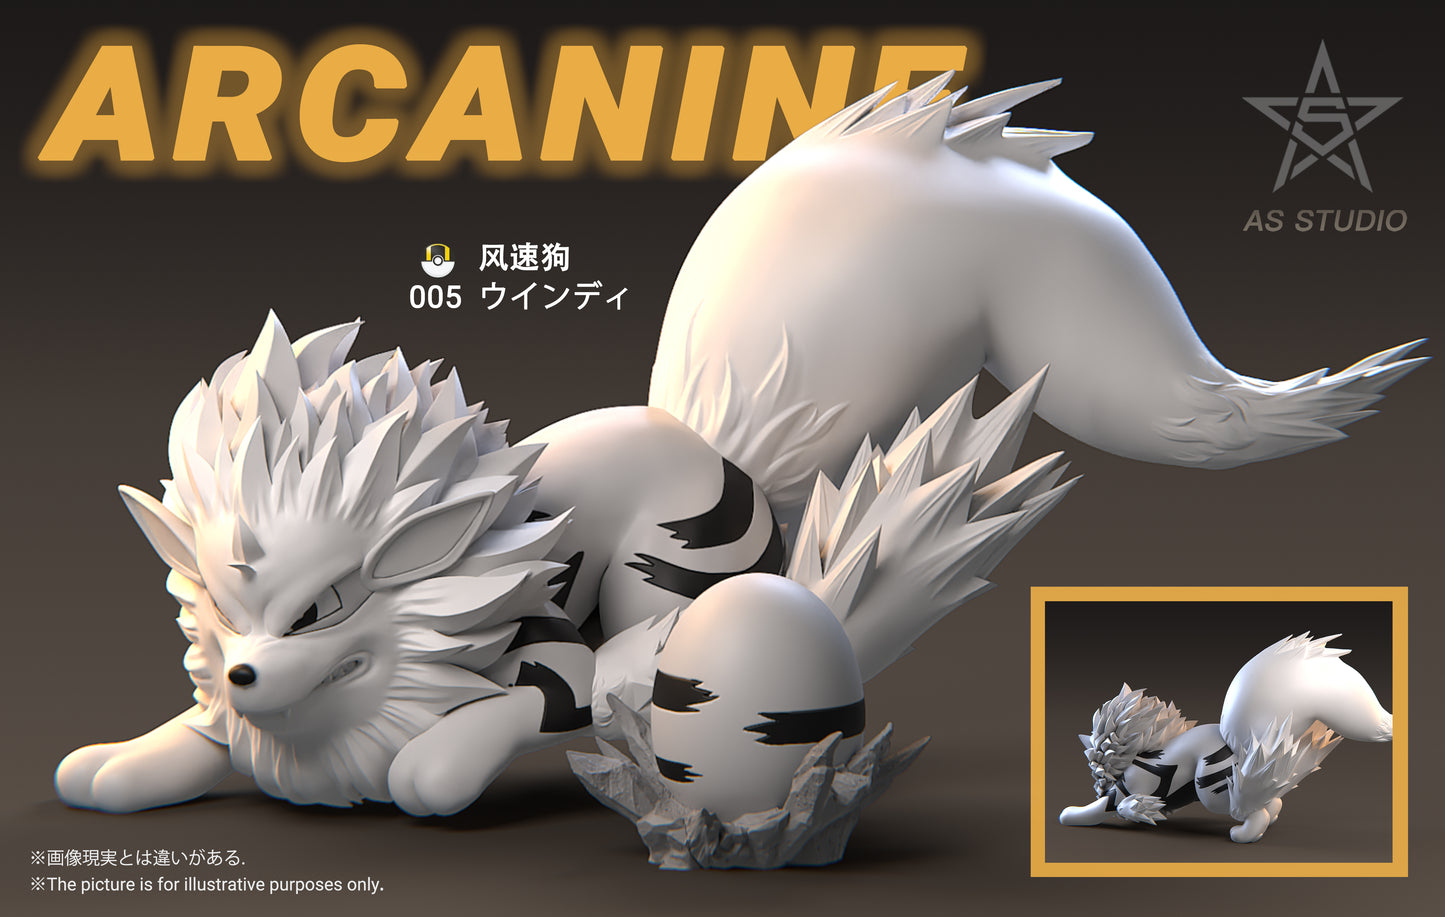 〖Sold Out〗Pokemon Scale World Arcanine 1:20 #059 - Asterism Studio